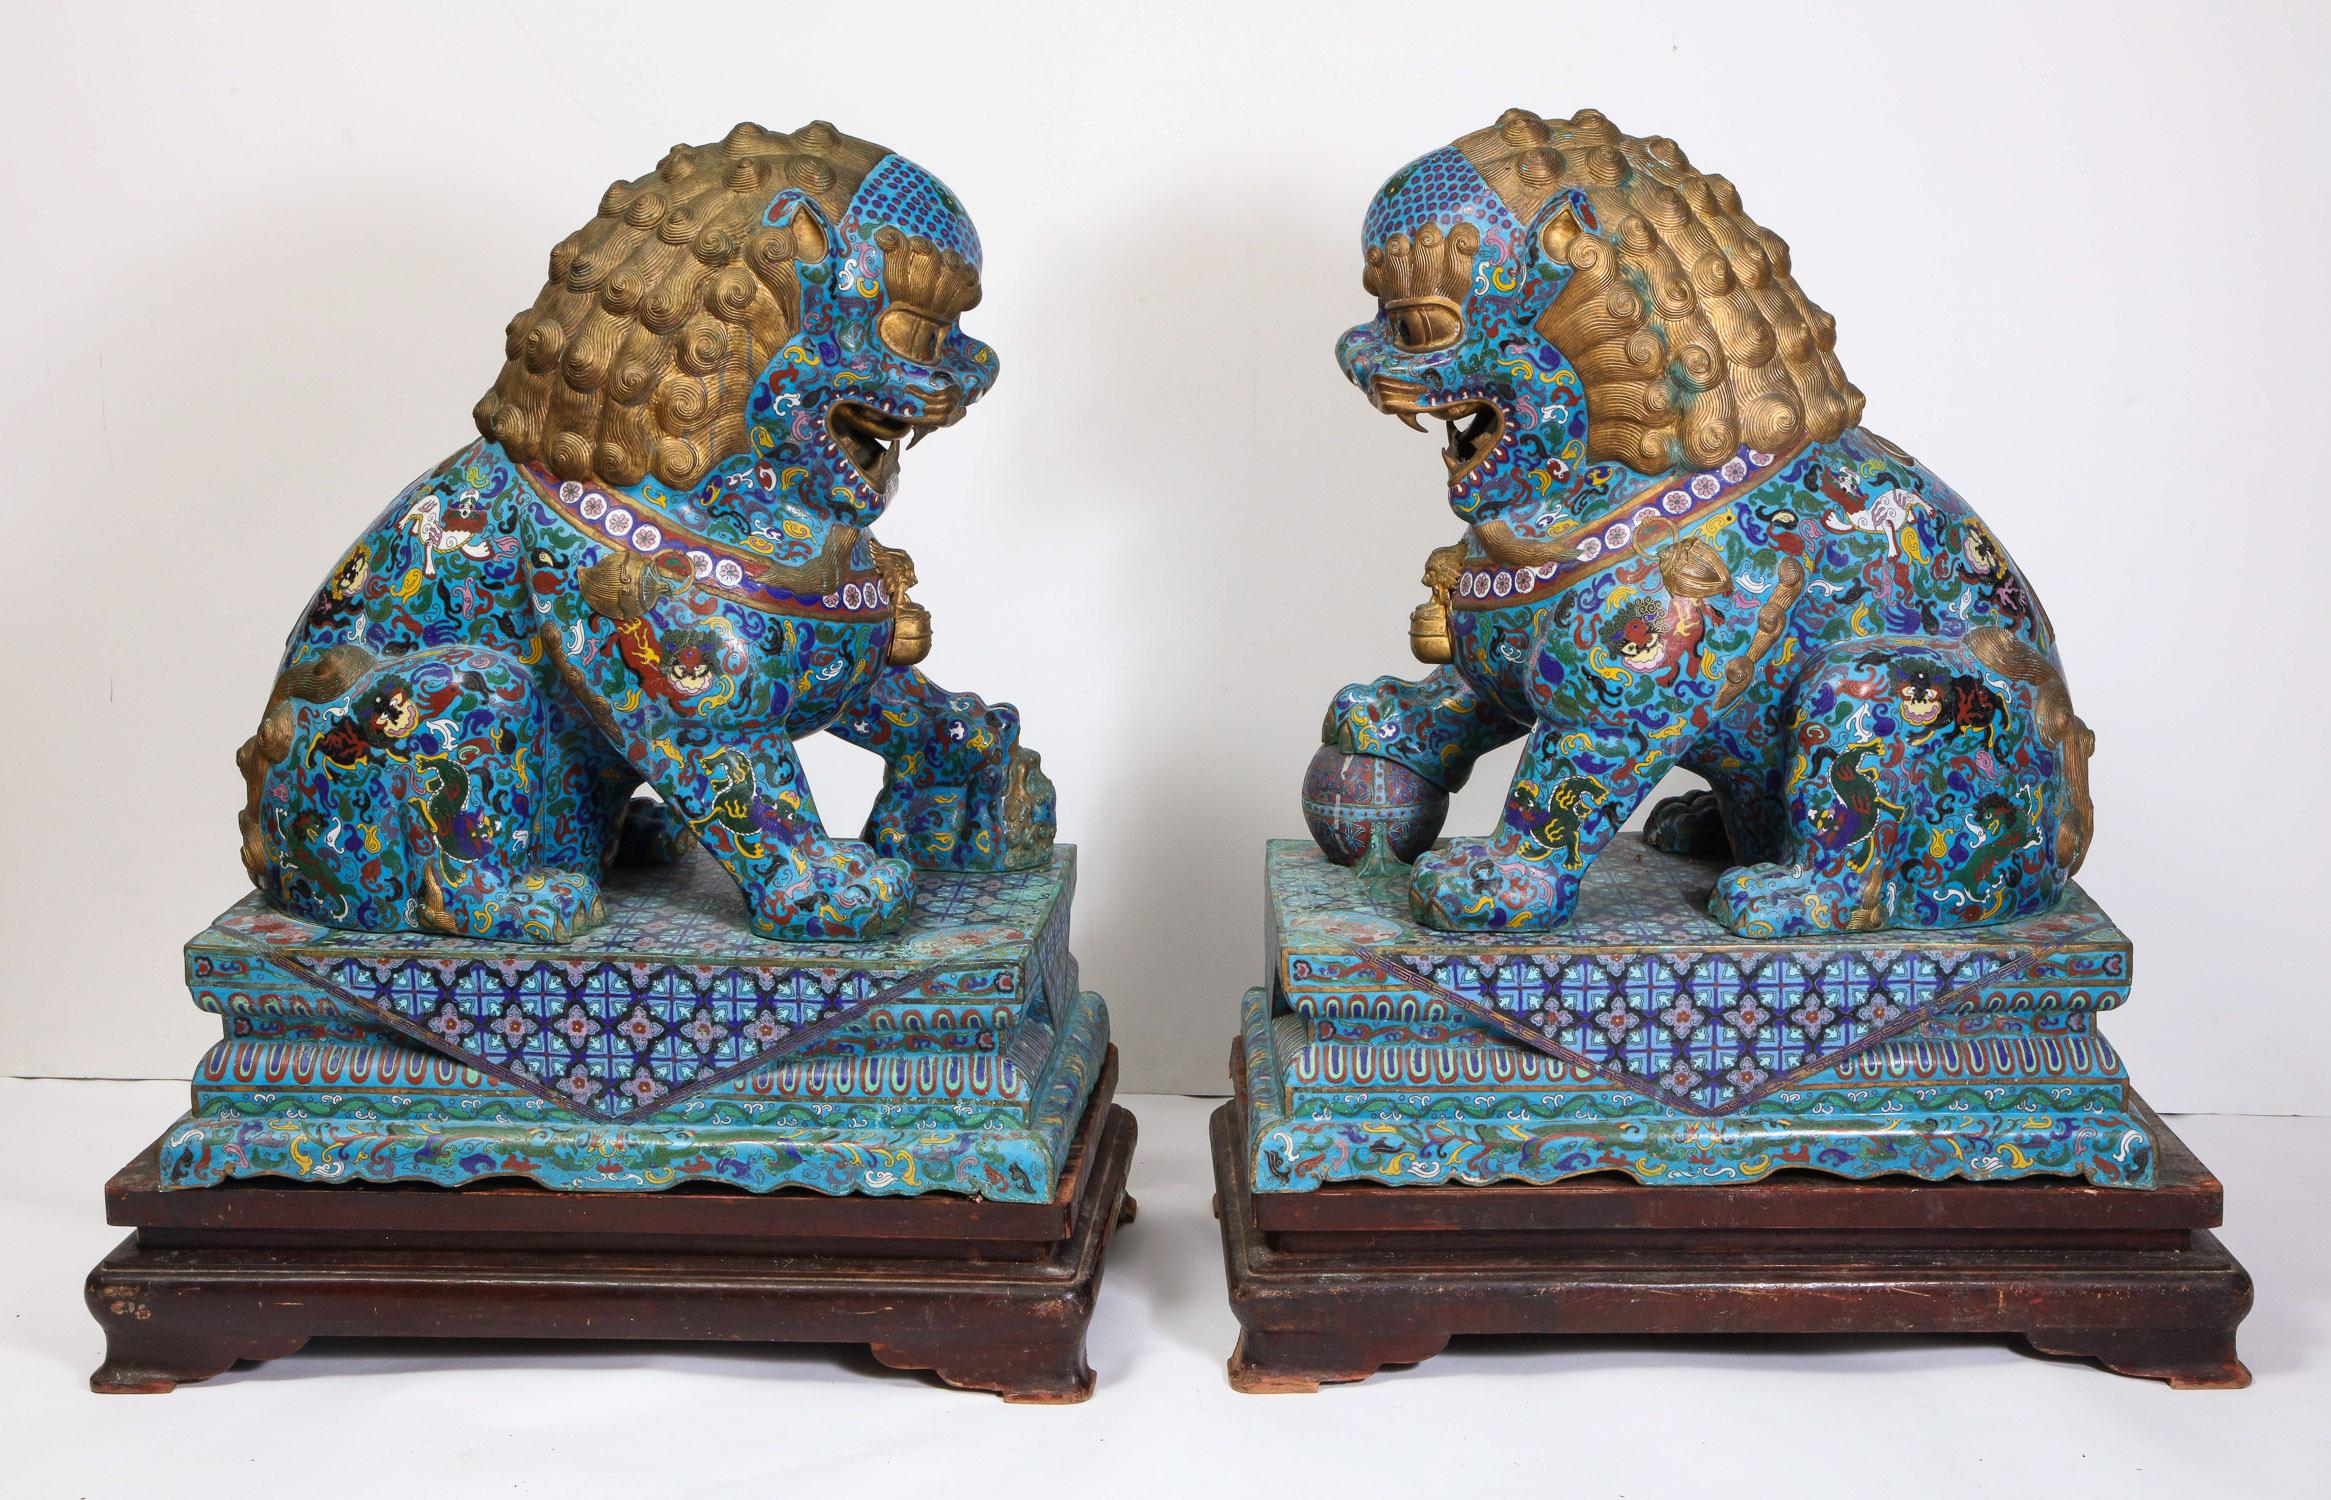 A massive pair of Chinese cloisonne enamel foo dogs / lions on wood stands,
circa 1940.

Very fine quality enameling throughout. 

These were used in front of temples and considered to be guardians by Asian tradition.

Measures: Without wood